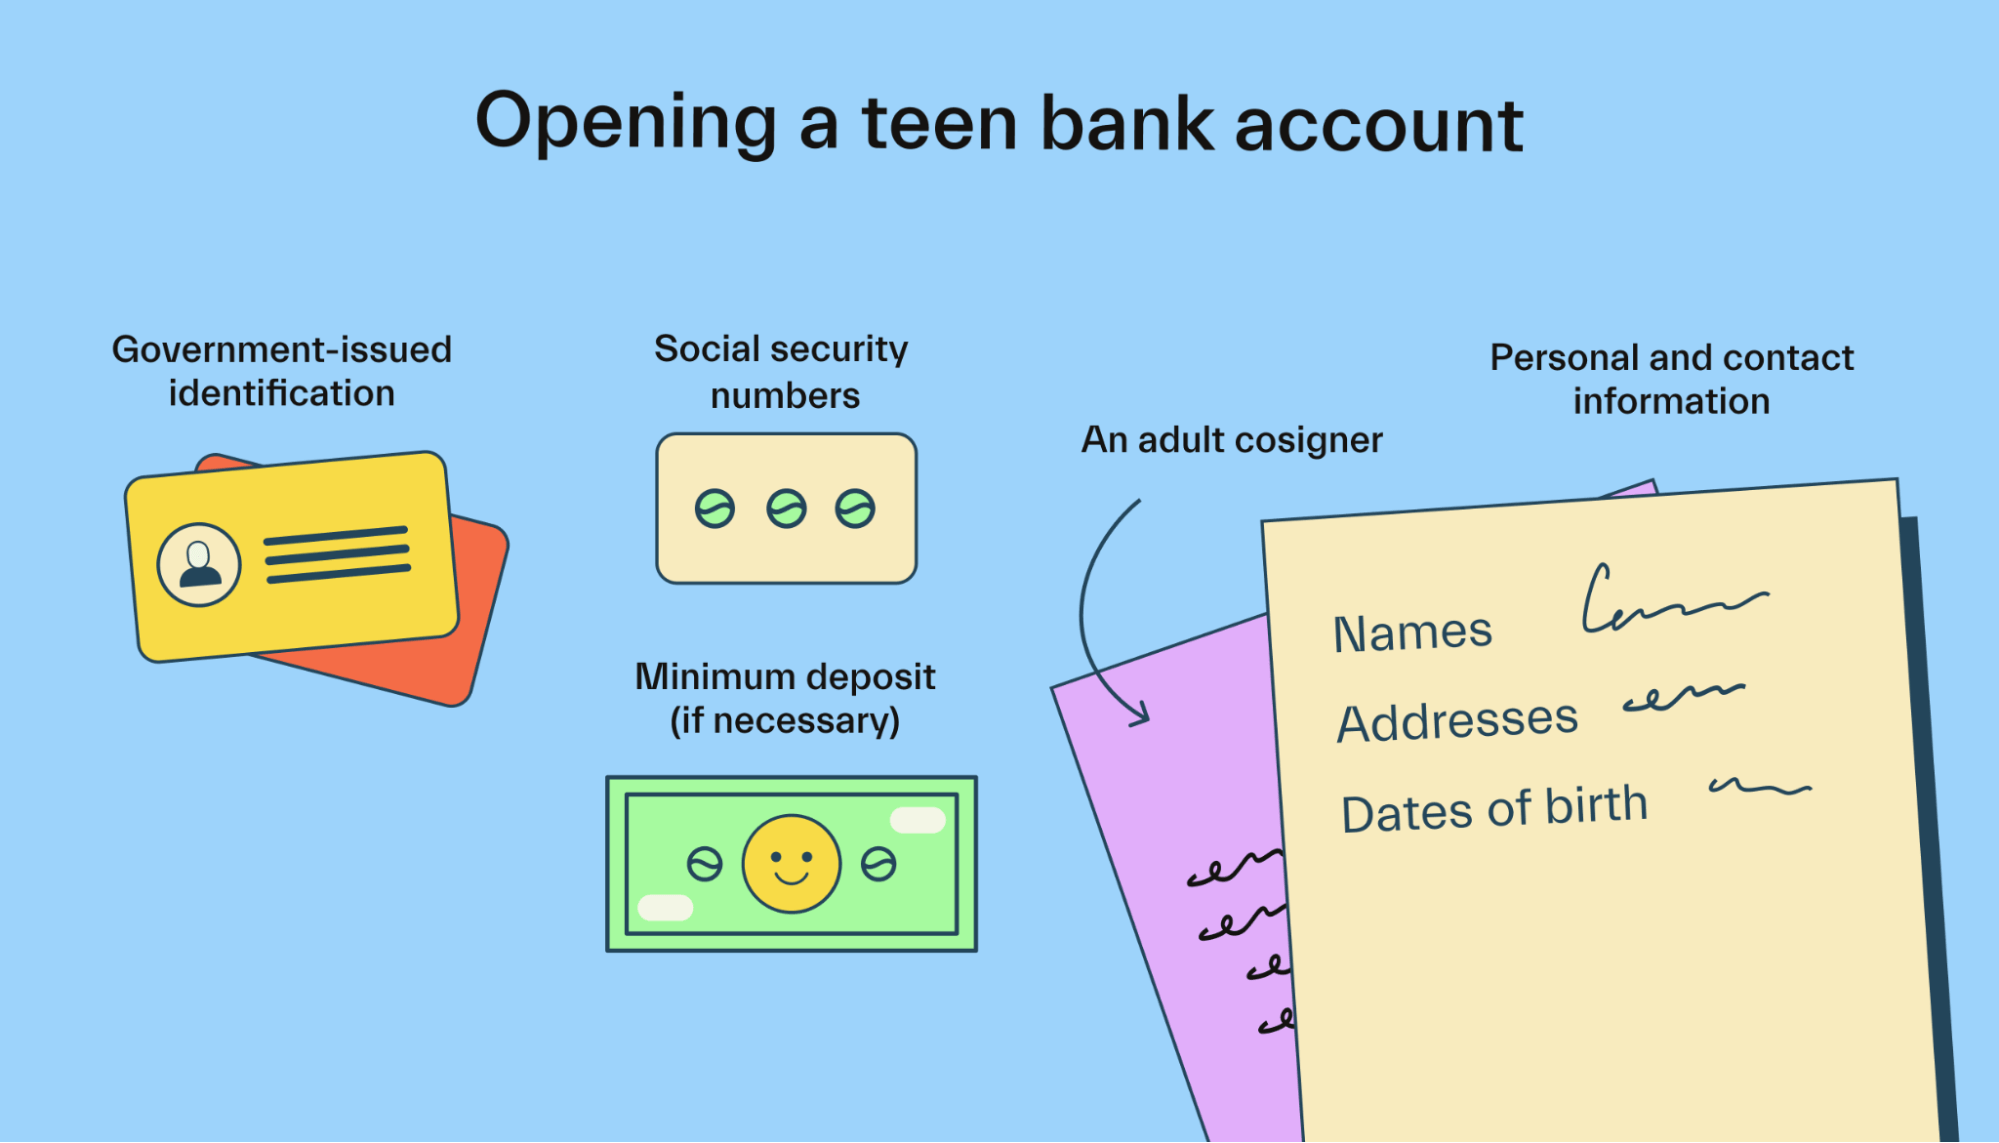 Opening a teen bank account